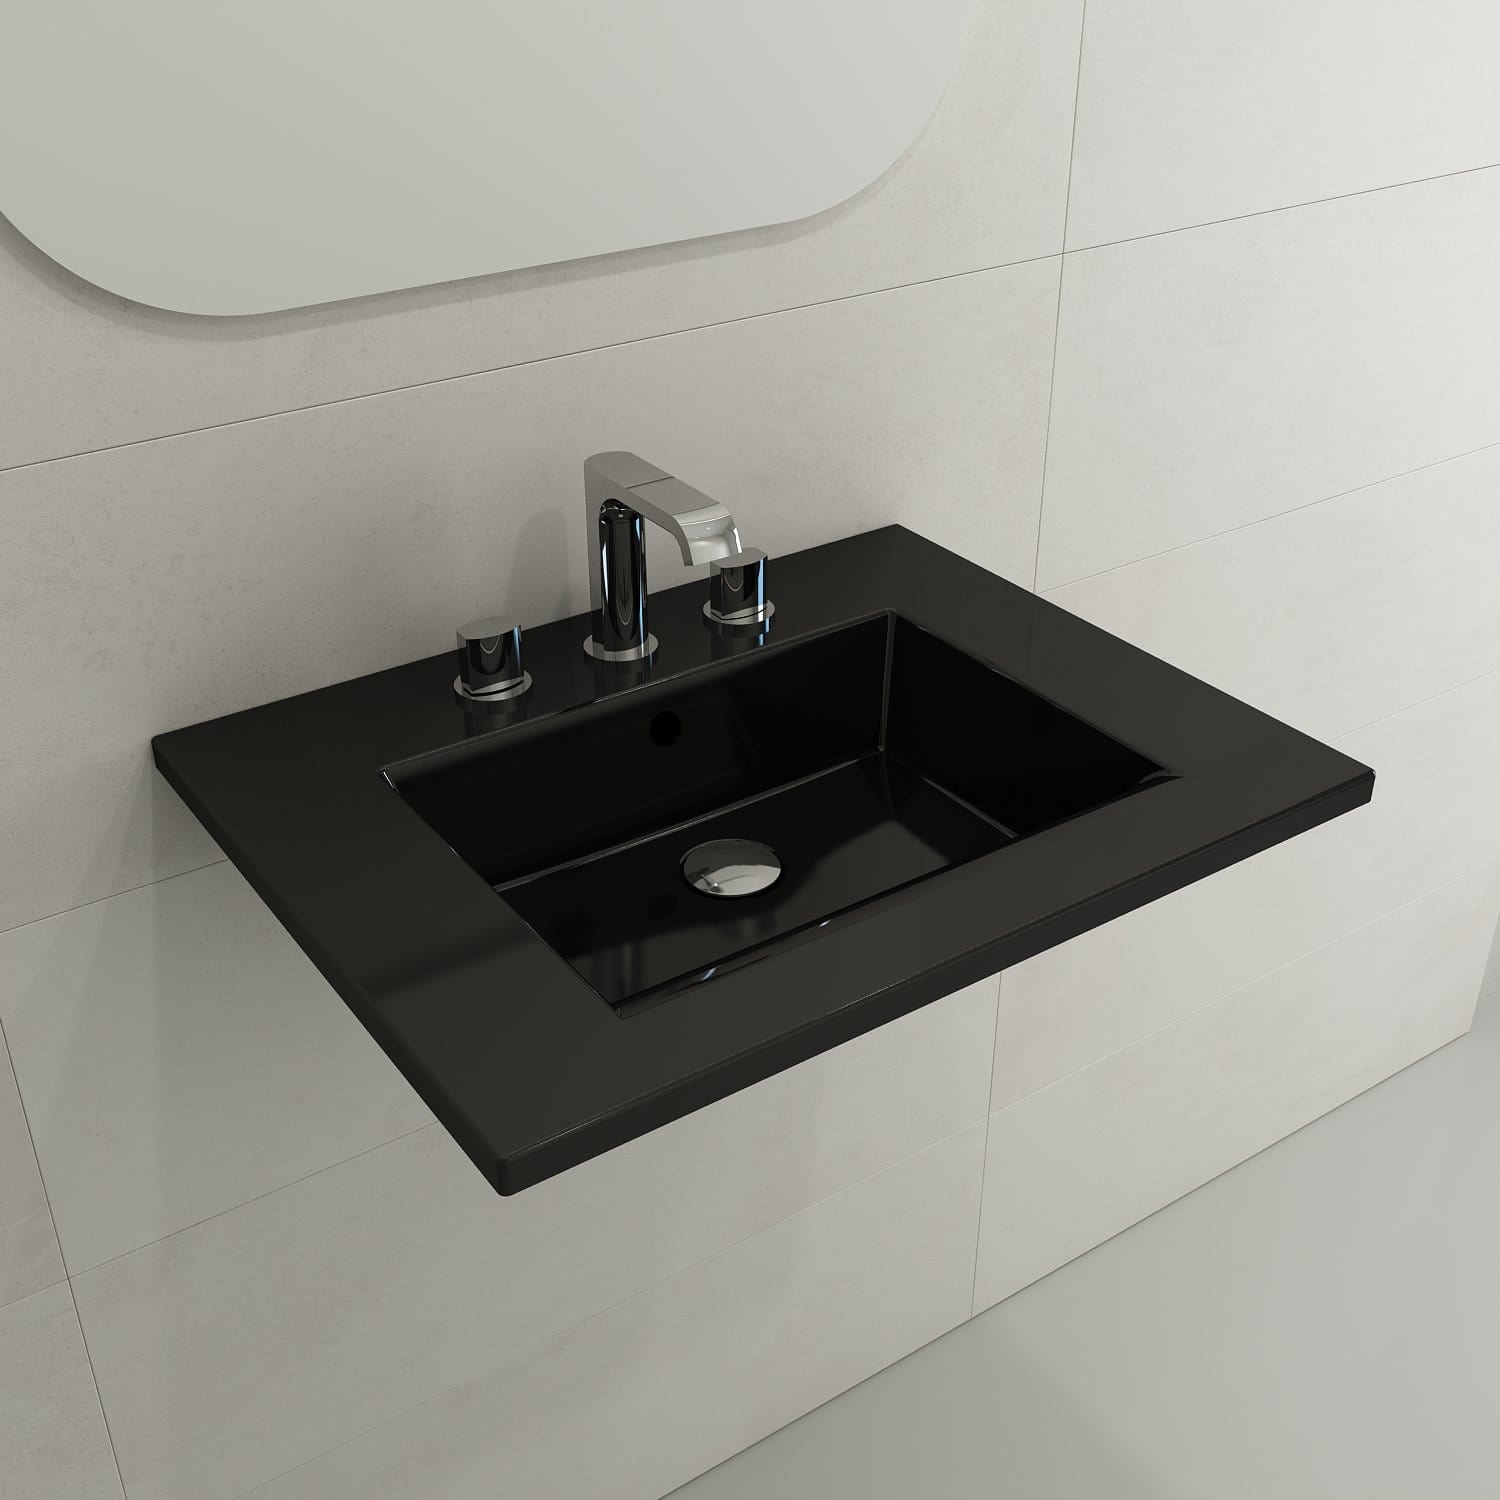 BOCCHI RAVENNA 24.5" Wall-Mounted Sink Fireclay 3-Hole With Overflow